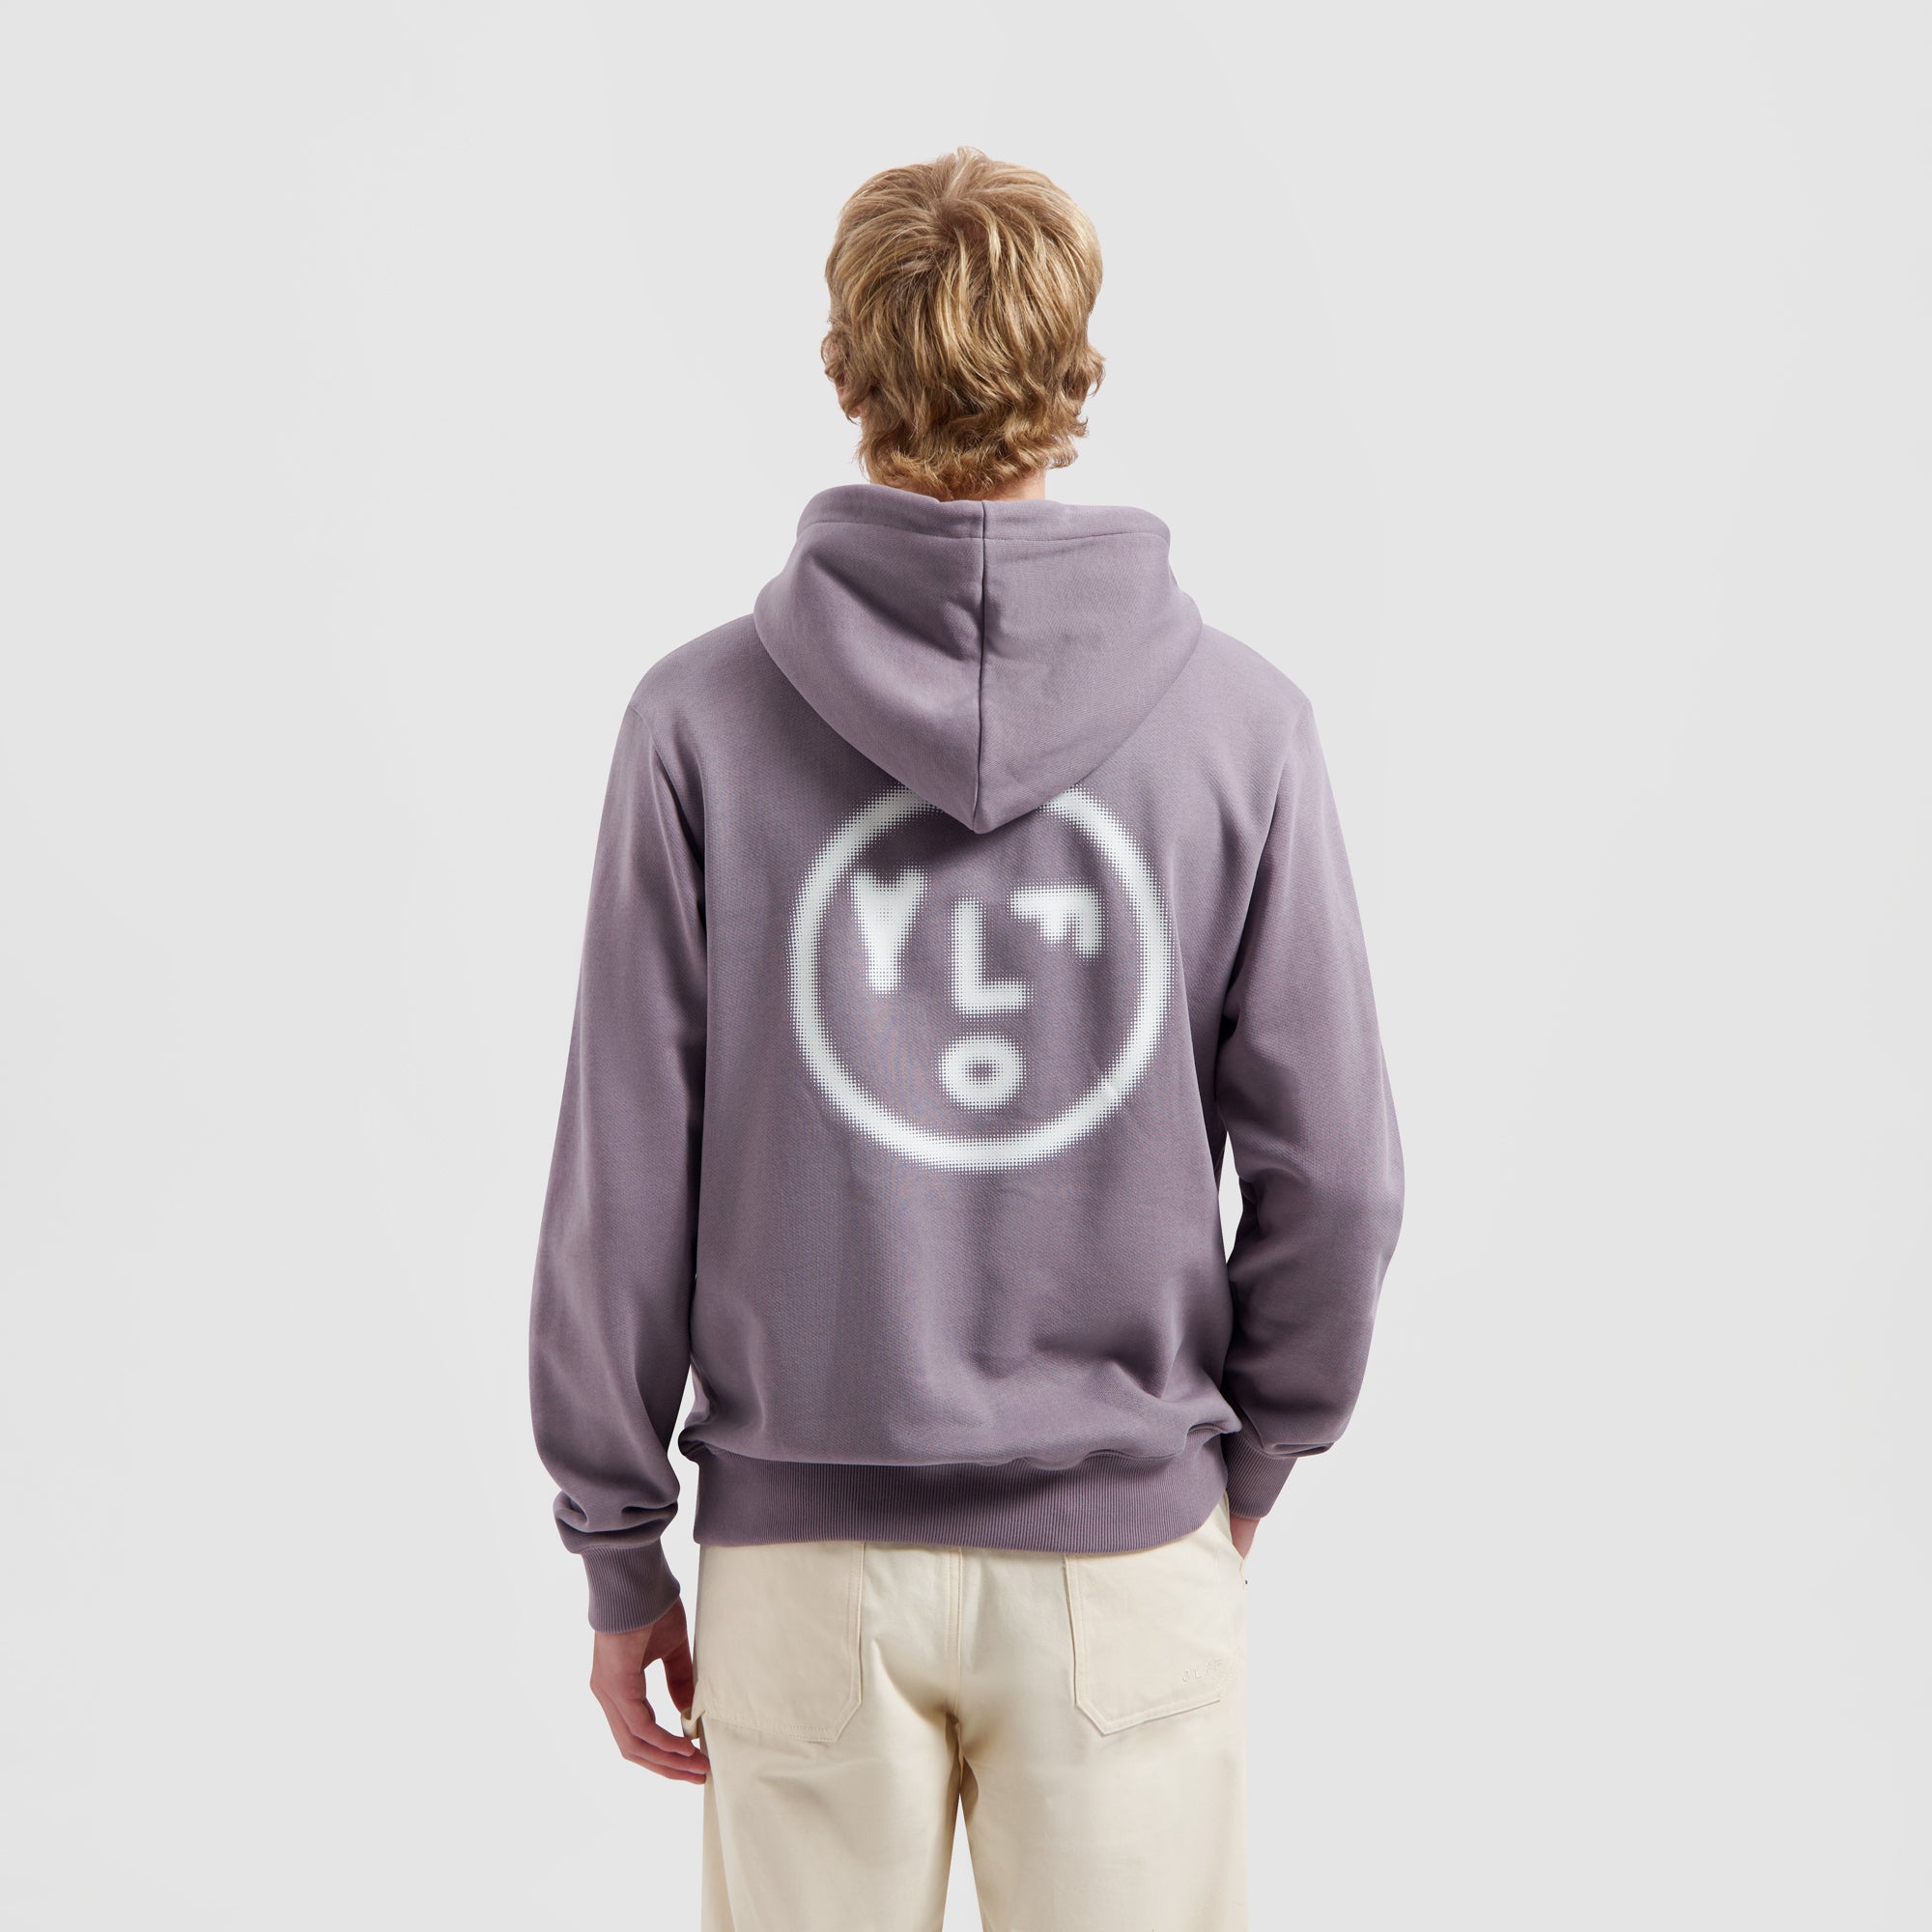 Pixelated Face Hoodie - Stone Grey